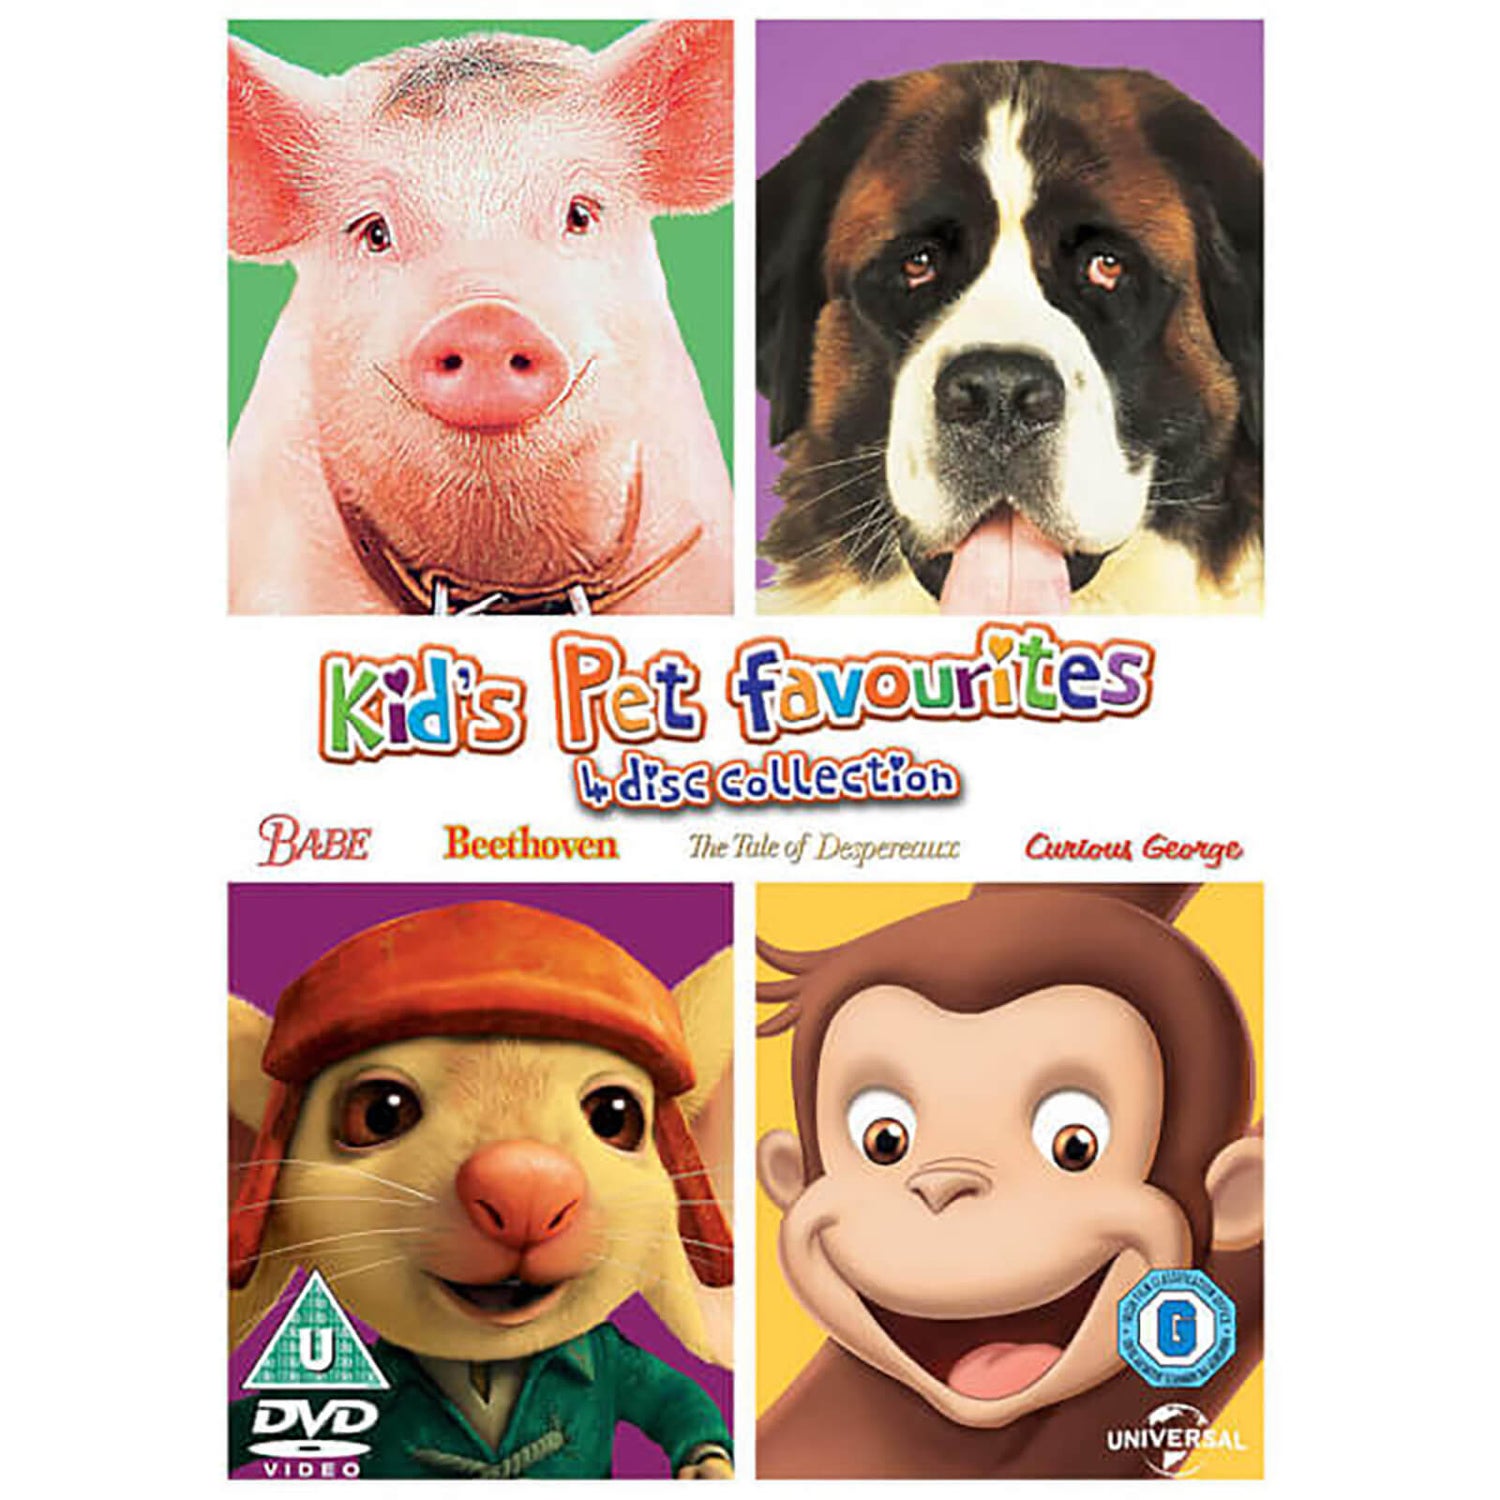 Kids' Favorite Pets Collection